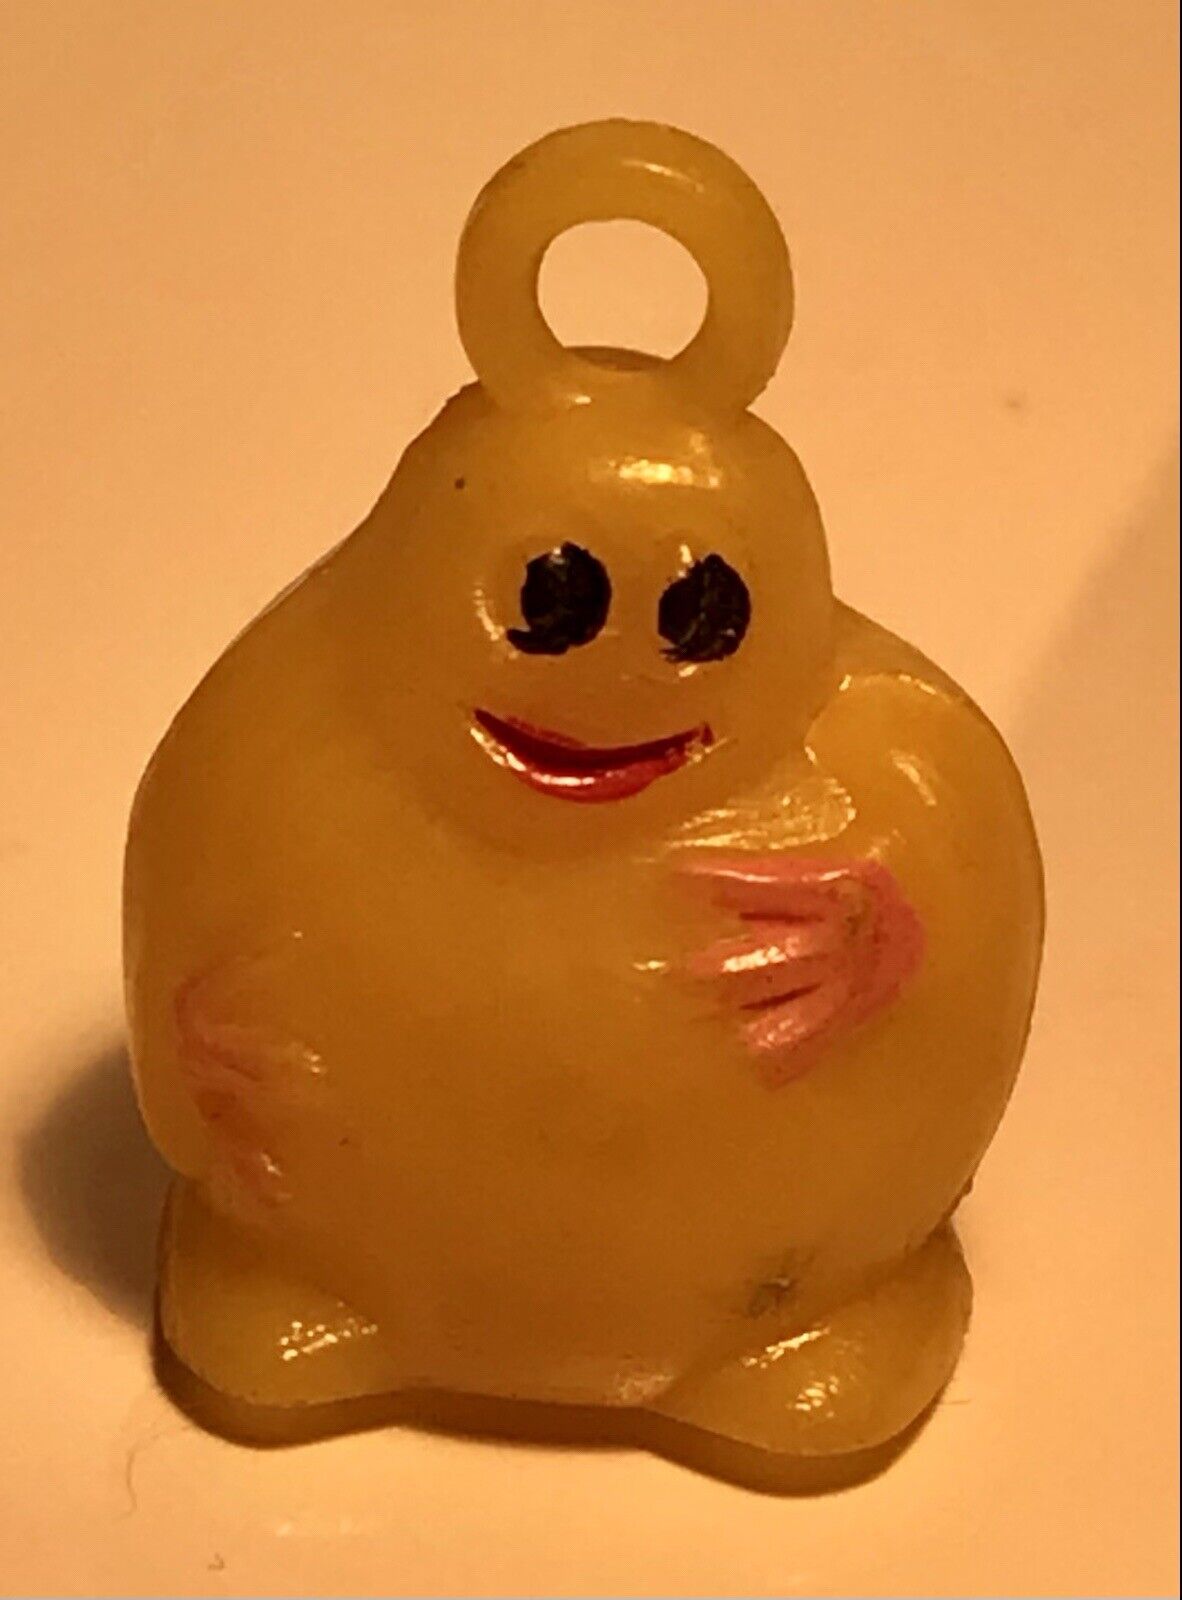 Ultra Rare 1960’s Vintage Boo Ghost Rattle Charm Cracker Jack Prize Adorable